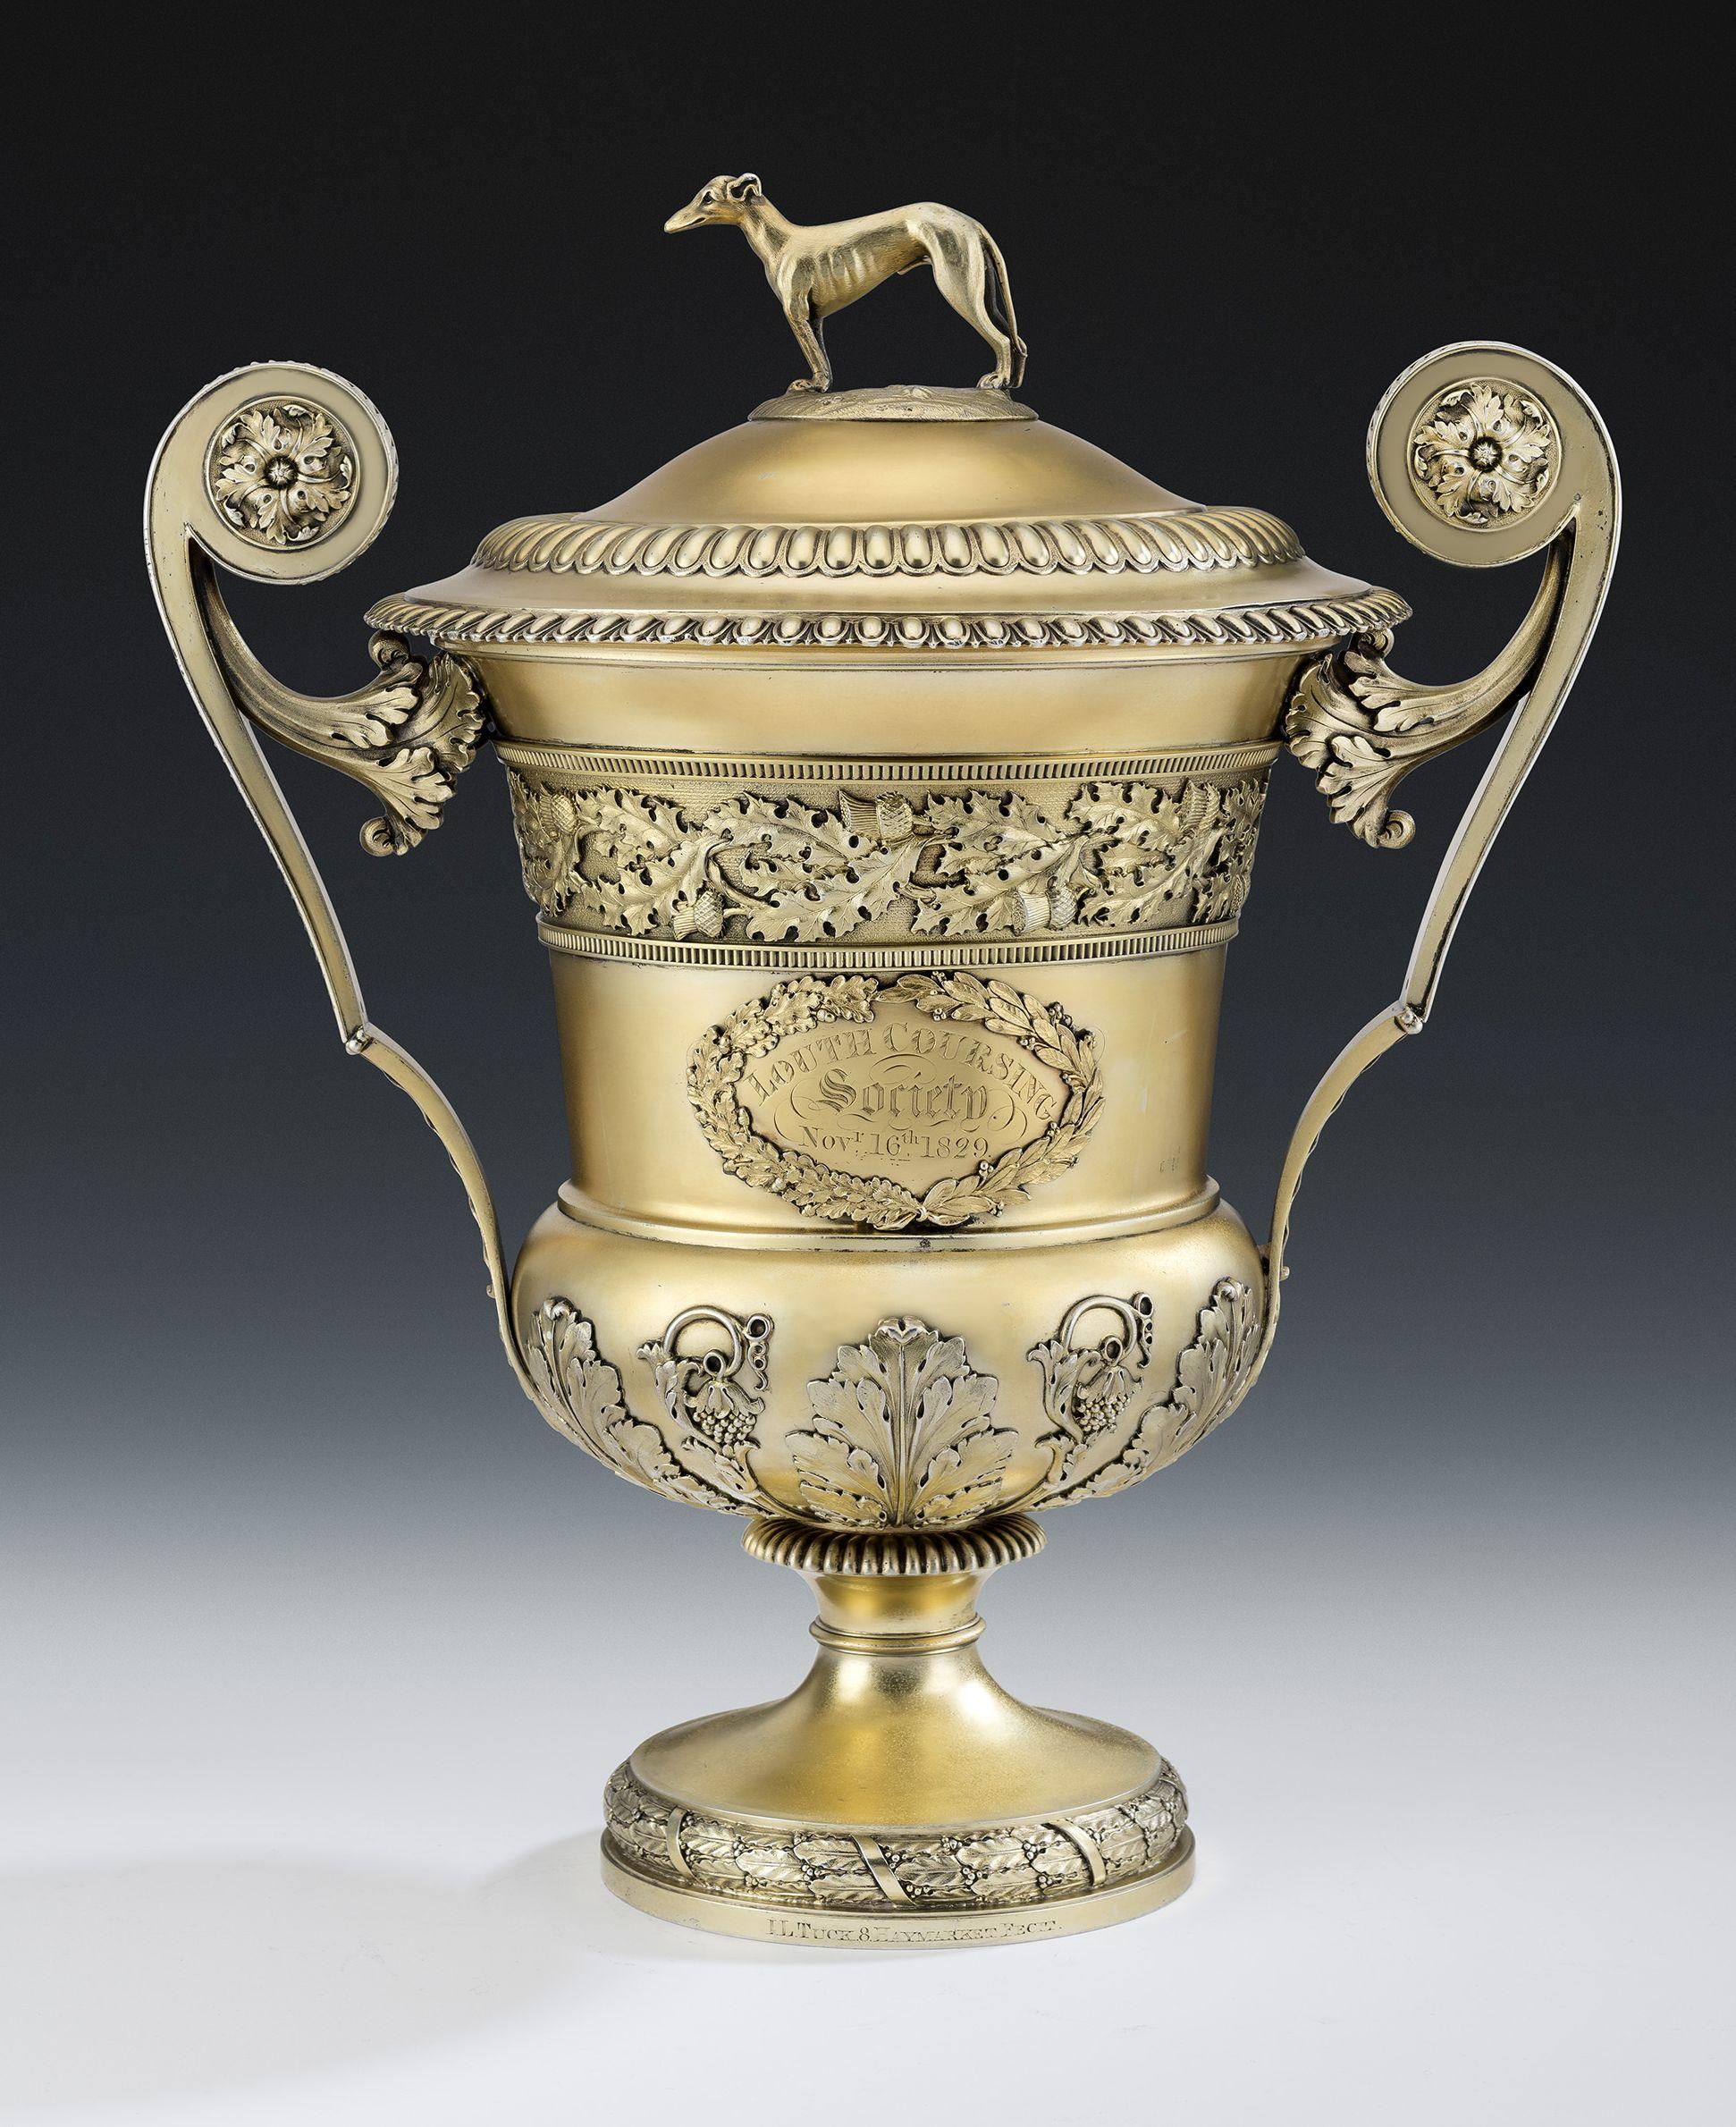 This important, and very unusual, George III silver gilt cup and cover, or wine cooler, was made in London in 1815 by William Elliott. This exceptional piece stands on a circular pedestal foot which is decorated with a tied laurel leaf and berry